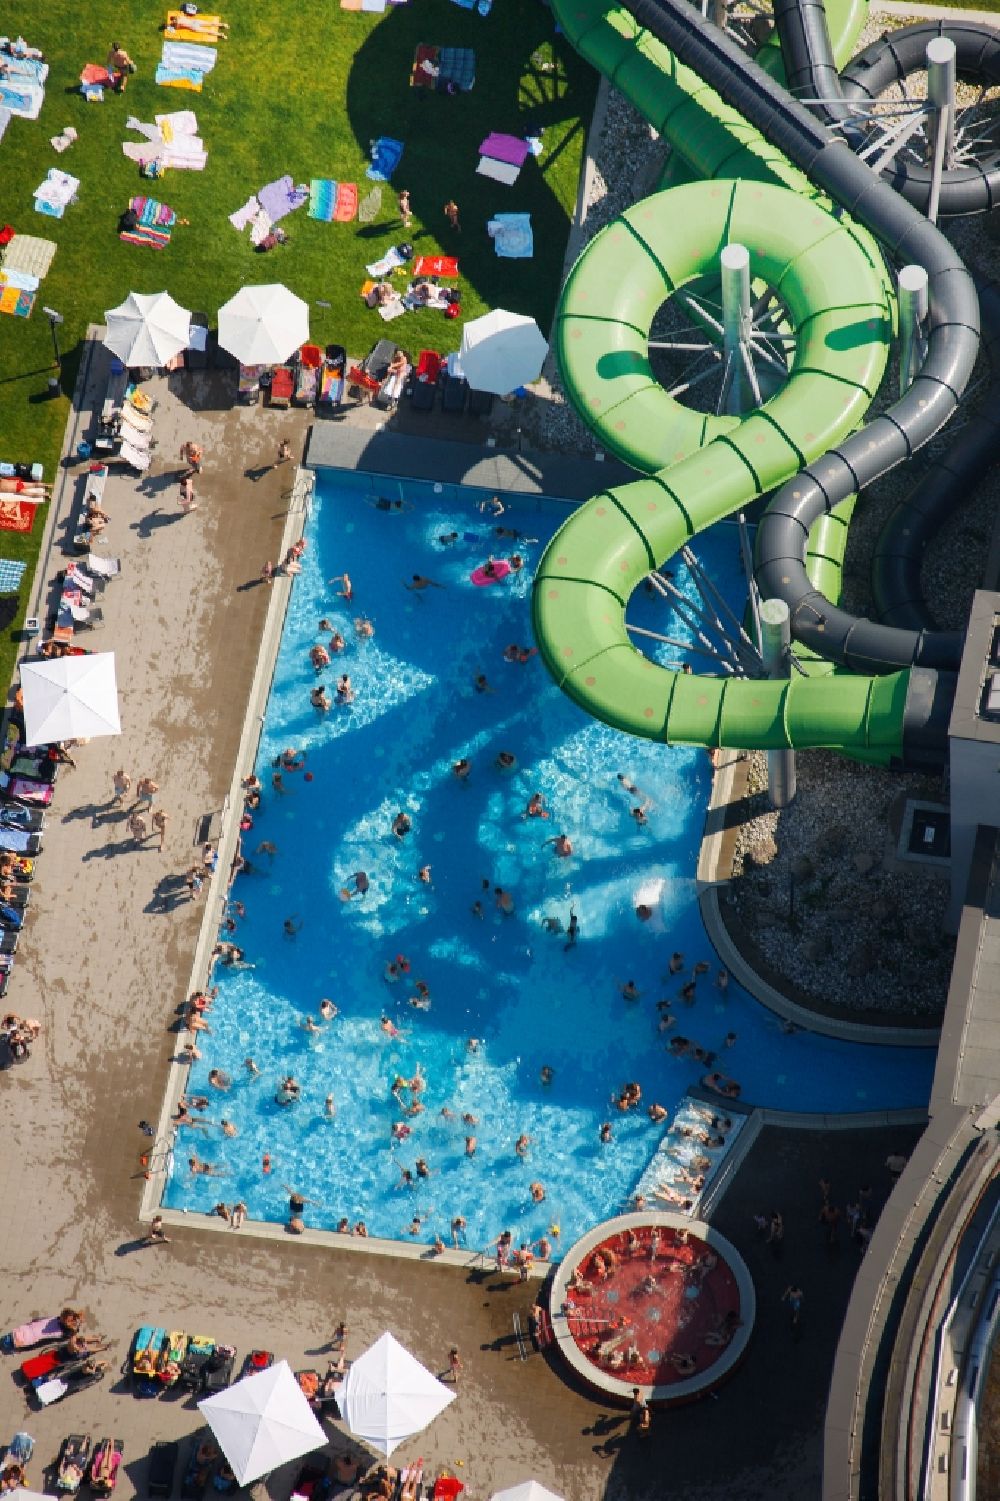 Oberhausen from above - Indoor and outdoor facilities of the recreational facility Aqua Park Oberhausen in Oberhausen in North Rhine-Westphalia